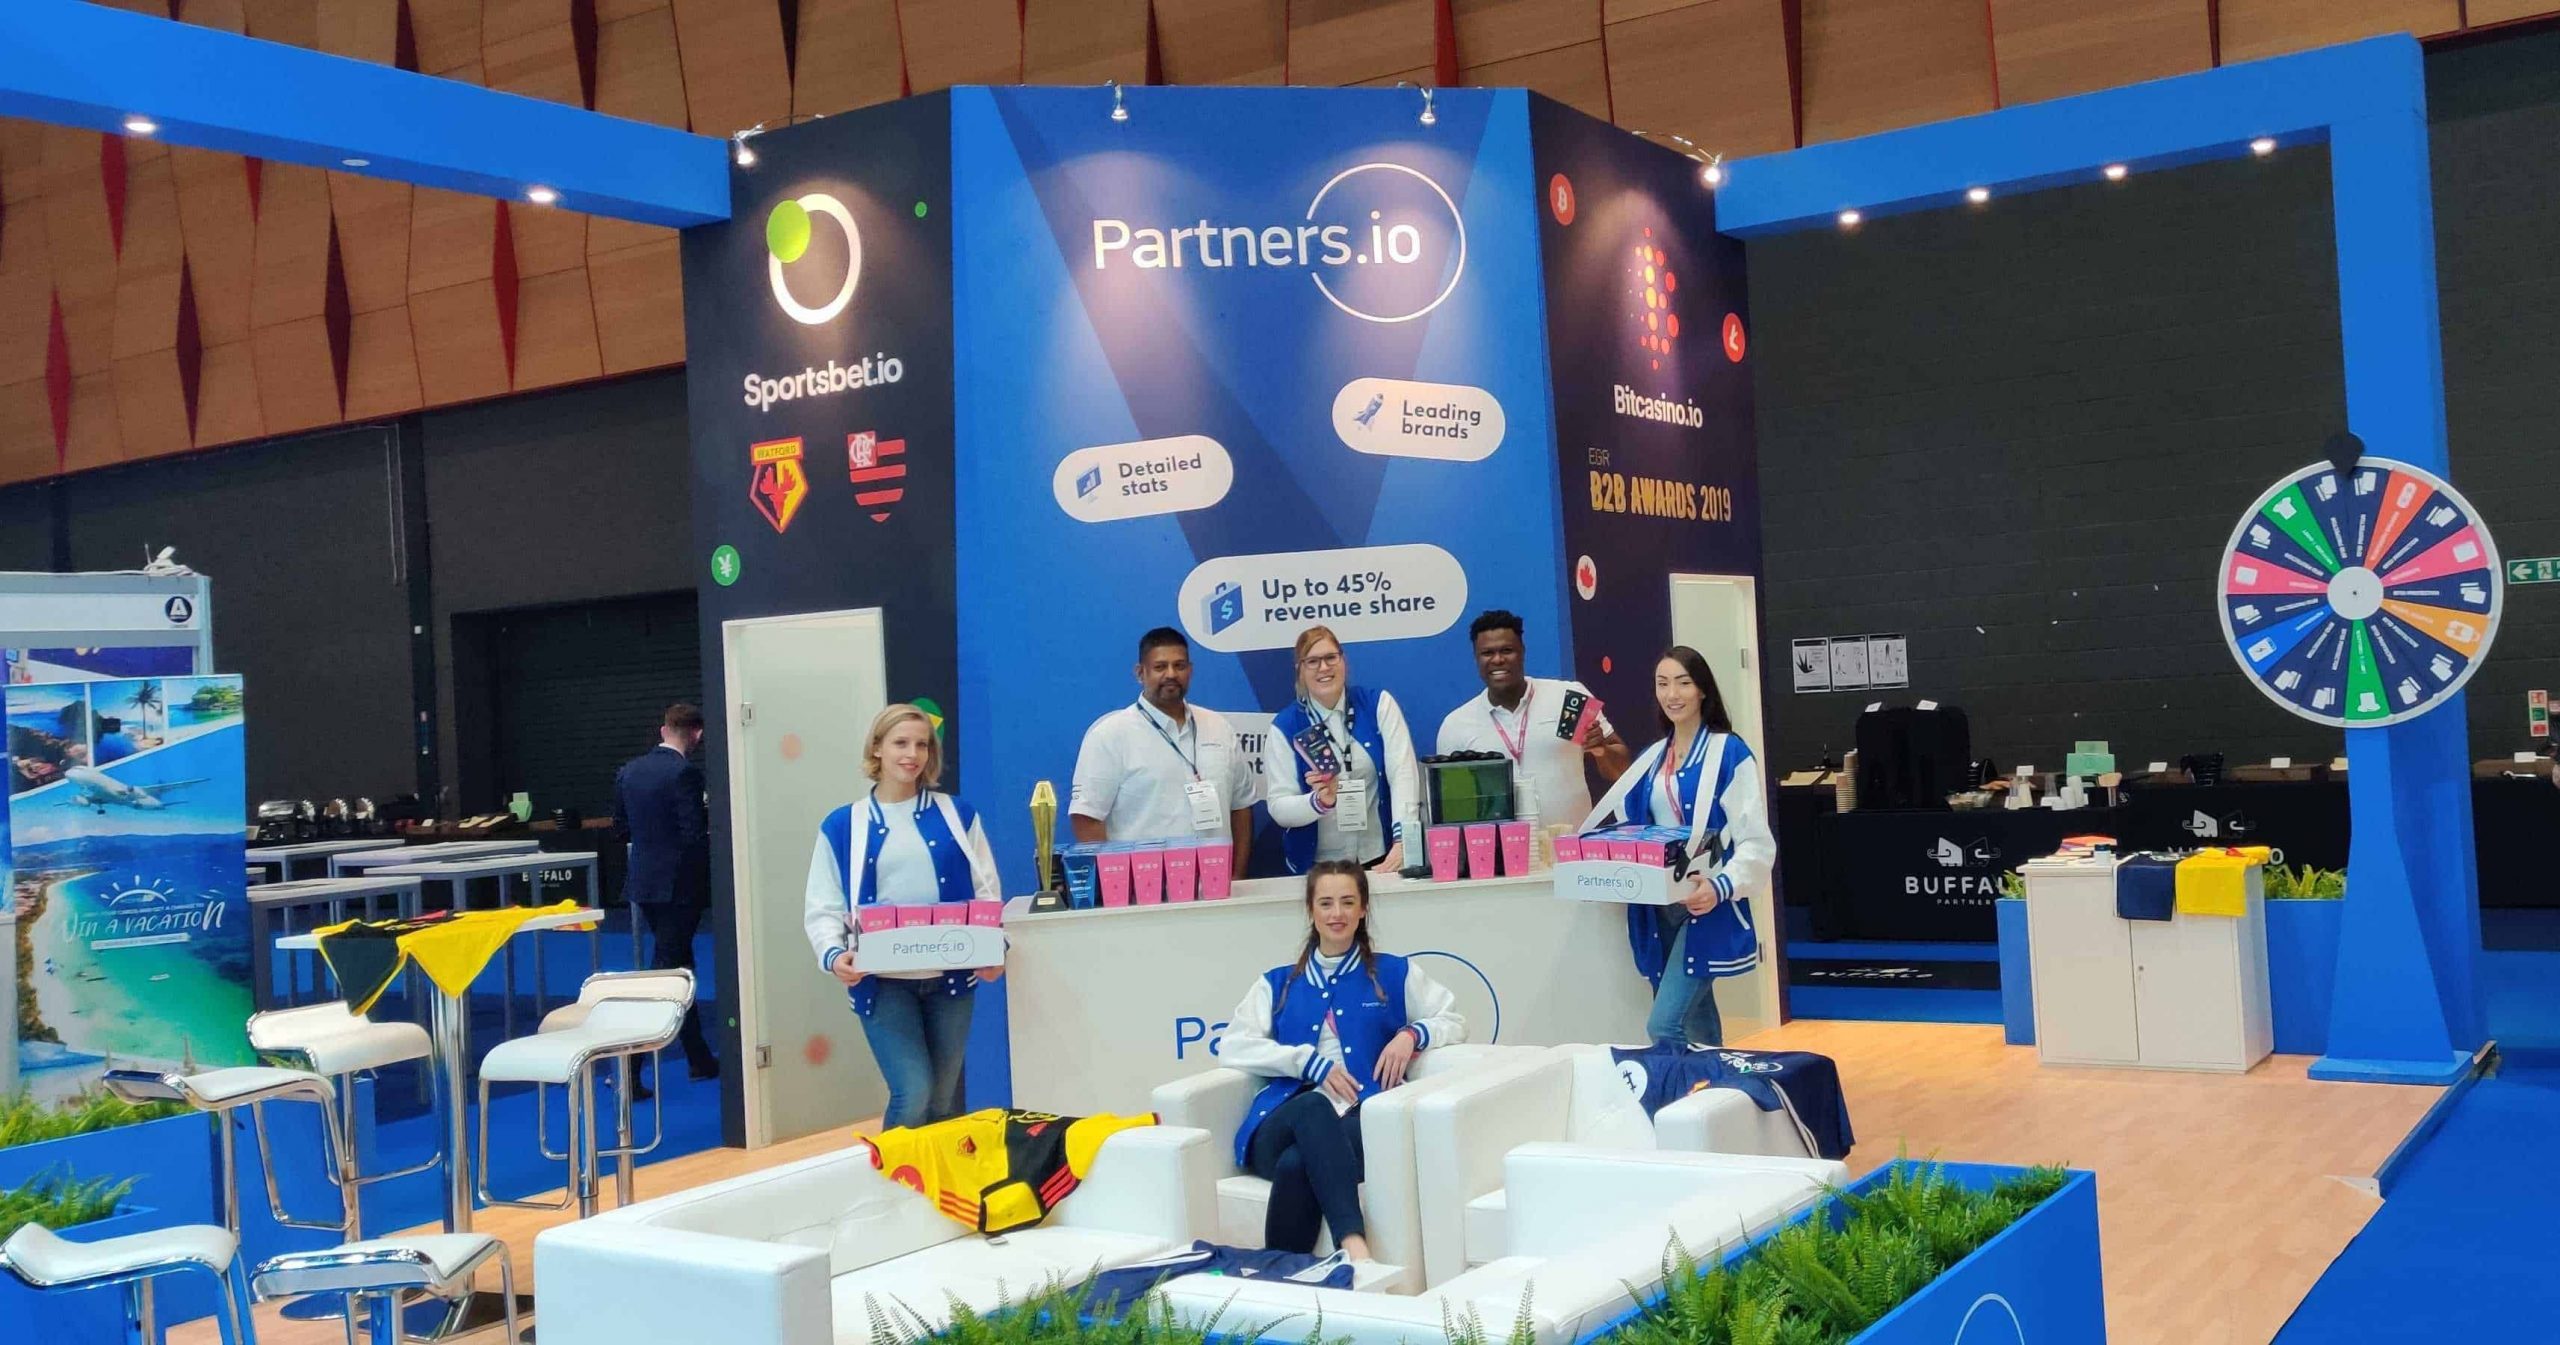 Partners.io: A recap of iGaming highlights in 2022